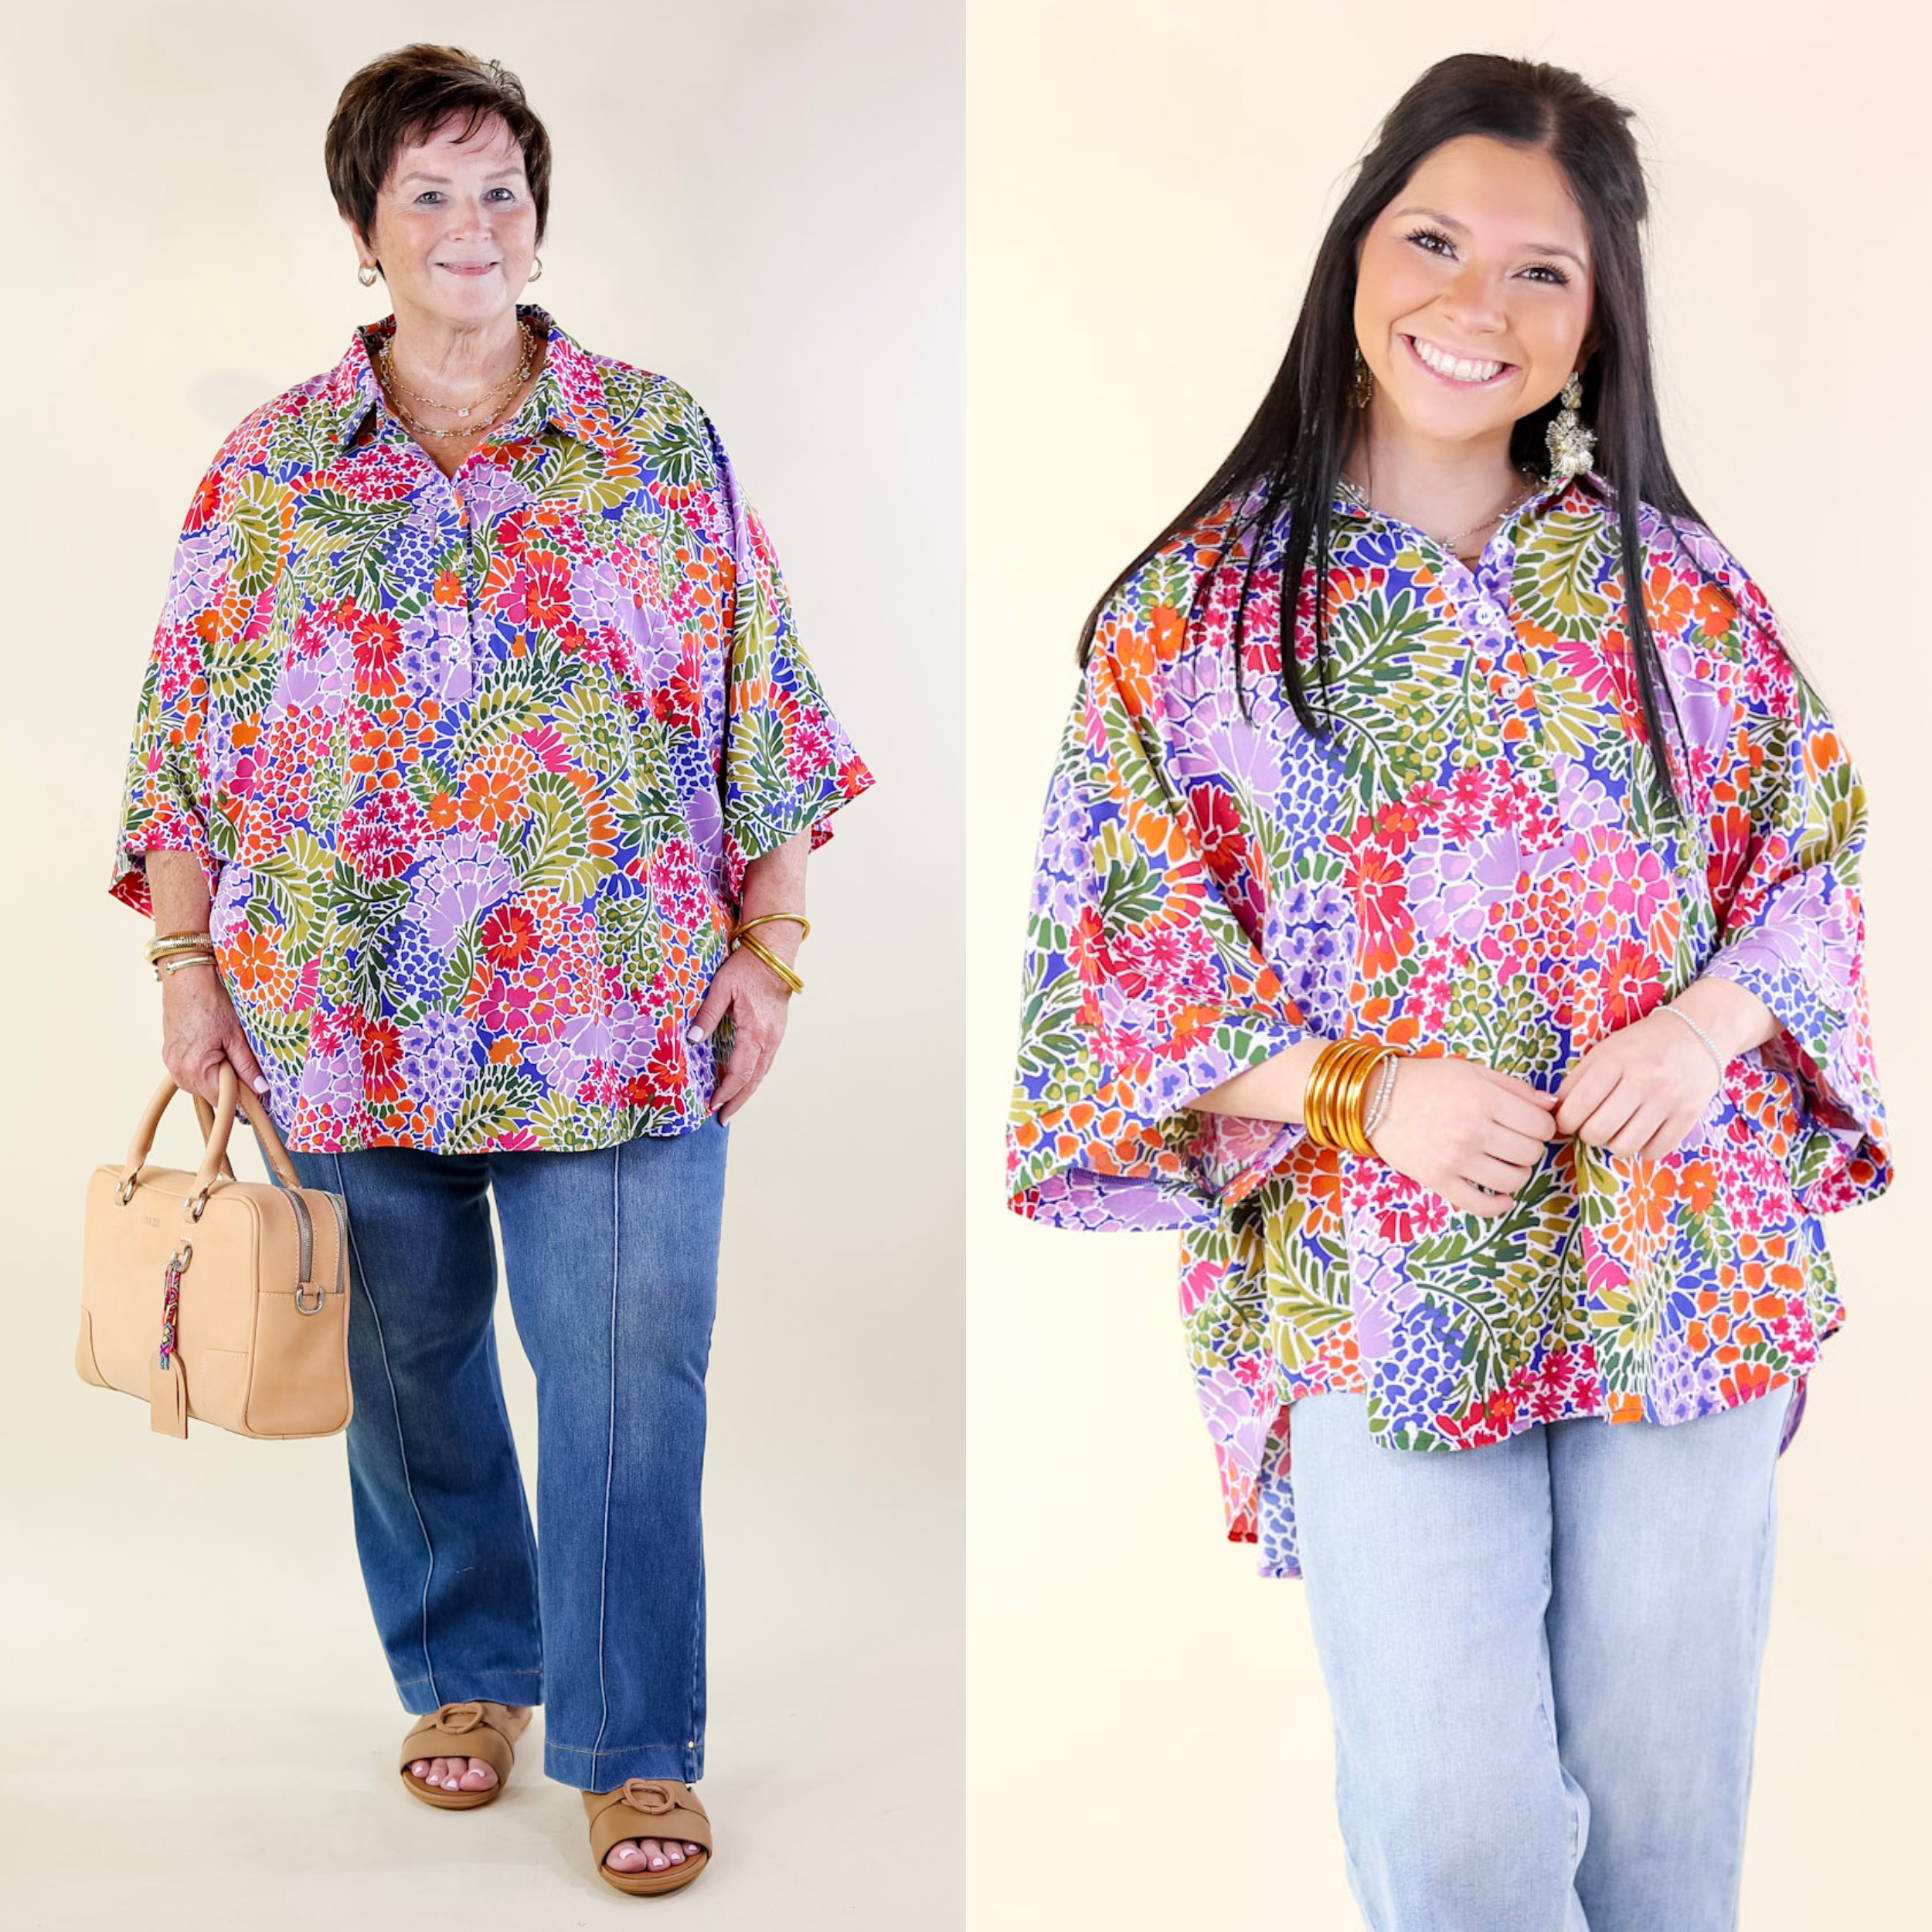 Sweet Surprise Multi-Color Floral Print Half Button Up Poncho Top with Collared Neckline - Giddy Up Glamour Boutique